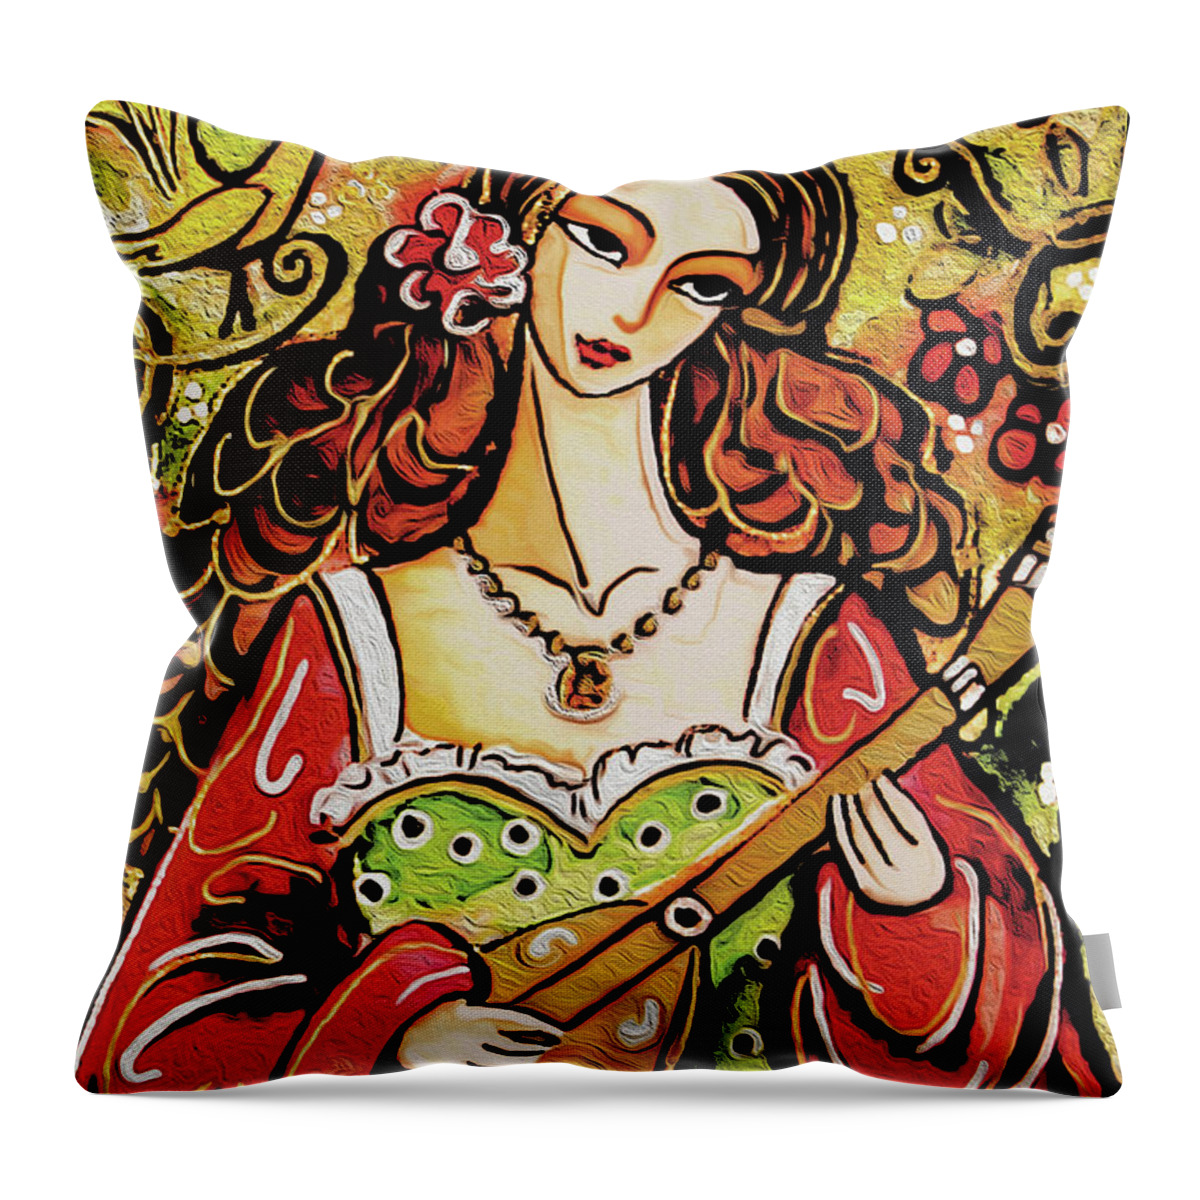 Bard Woman Throw Pillow featuring the painting Bard Lady I by Eva Campbell